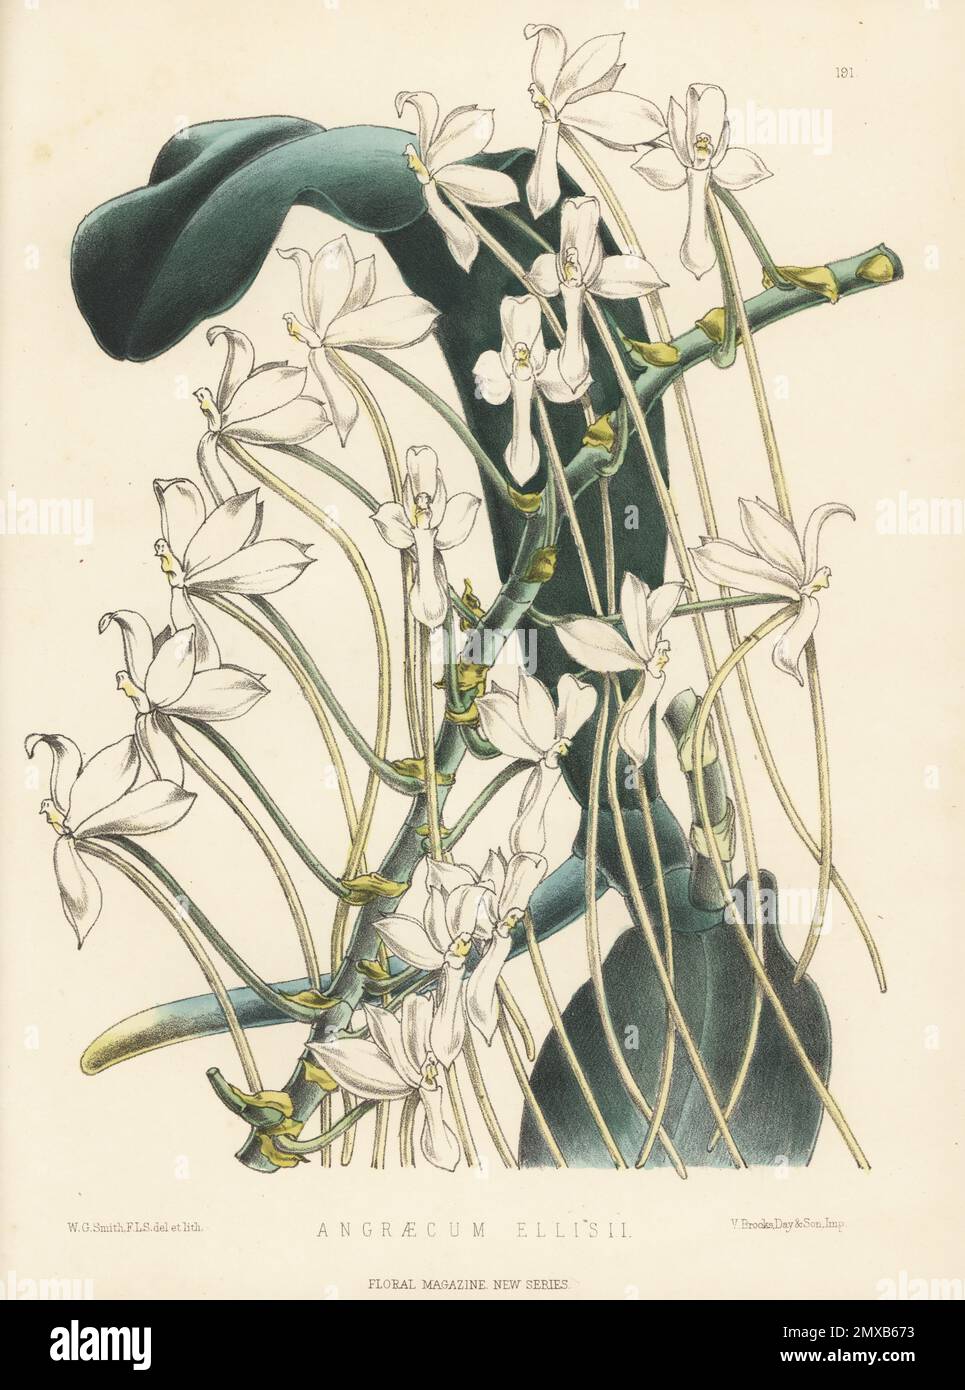 Aerangis ellisii, epiphytic orchid. Grown by Mr Day of Tottenham from a plant brought from Madagascar by the Reverend W. Ellis. As Angraecum ellisii. Handcolored botanical illustration drawn and lithographed by Worthington George Smith from Henry Honywood Dombrain's Floral Magazine, New Series, Volume 4, L. Reeve, London, 1875. Lithograph printed by Vincent Brooks, Day & Son. Stock Photo